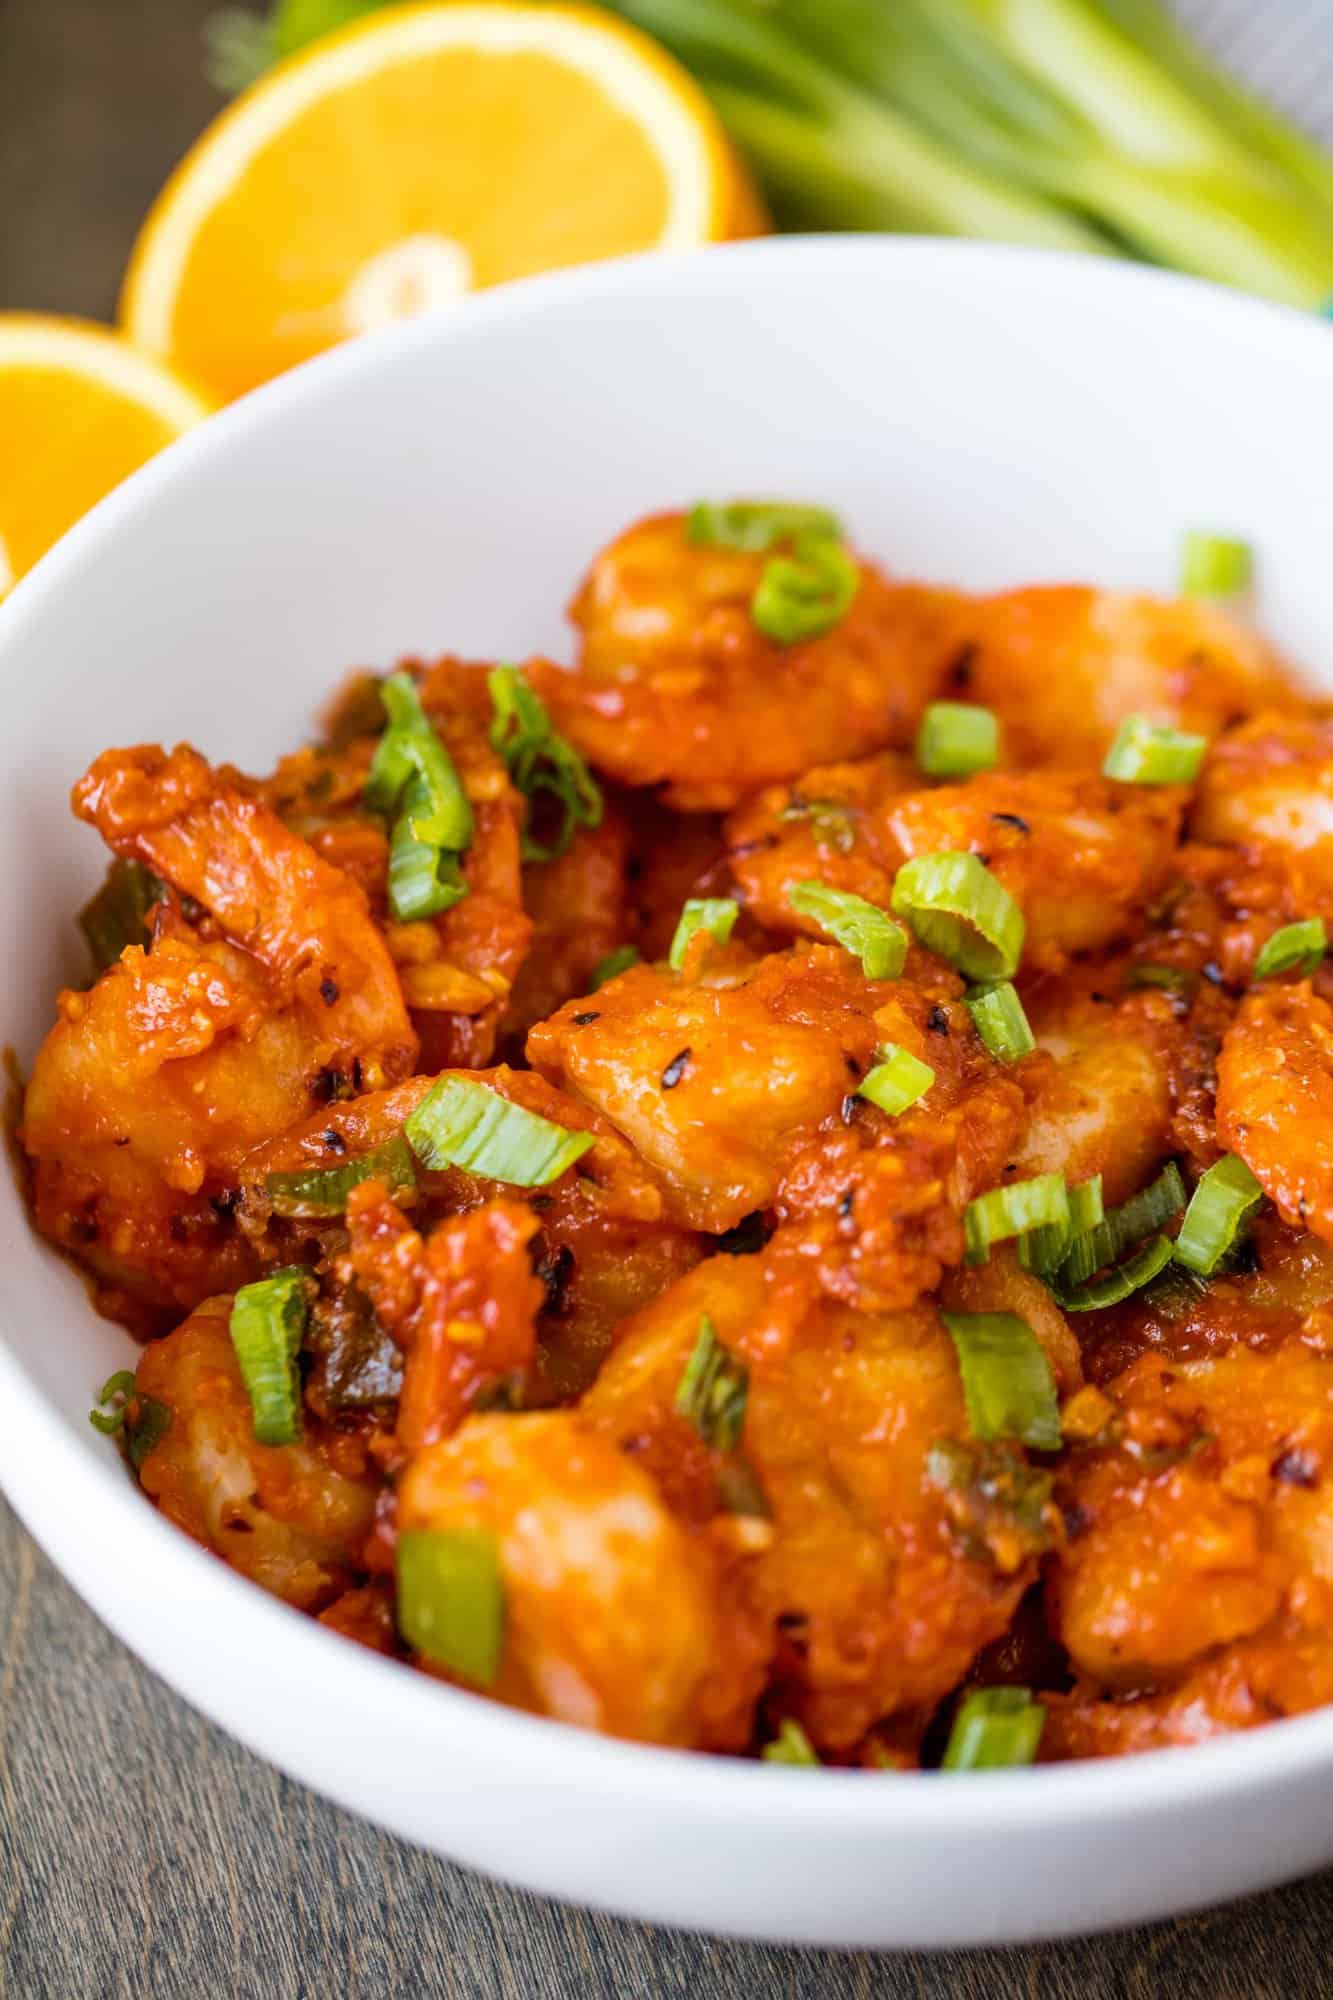 Orange Peel Shrimp is a fast and easy seafood dinner idea that will become an instant favorite. Serve this easy shrimp recipe up over some steamed rice with a side of broccoli. And that orange glaze is to die for!